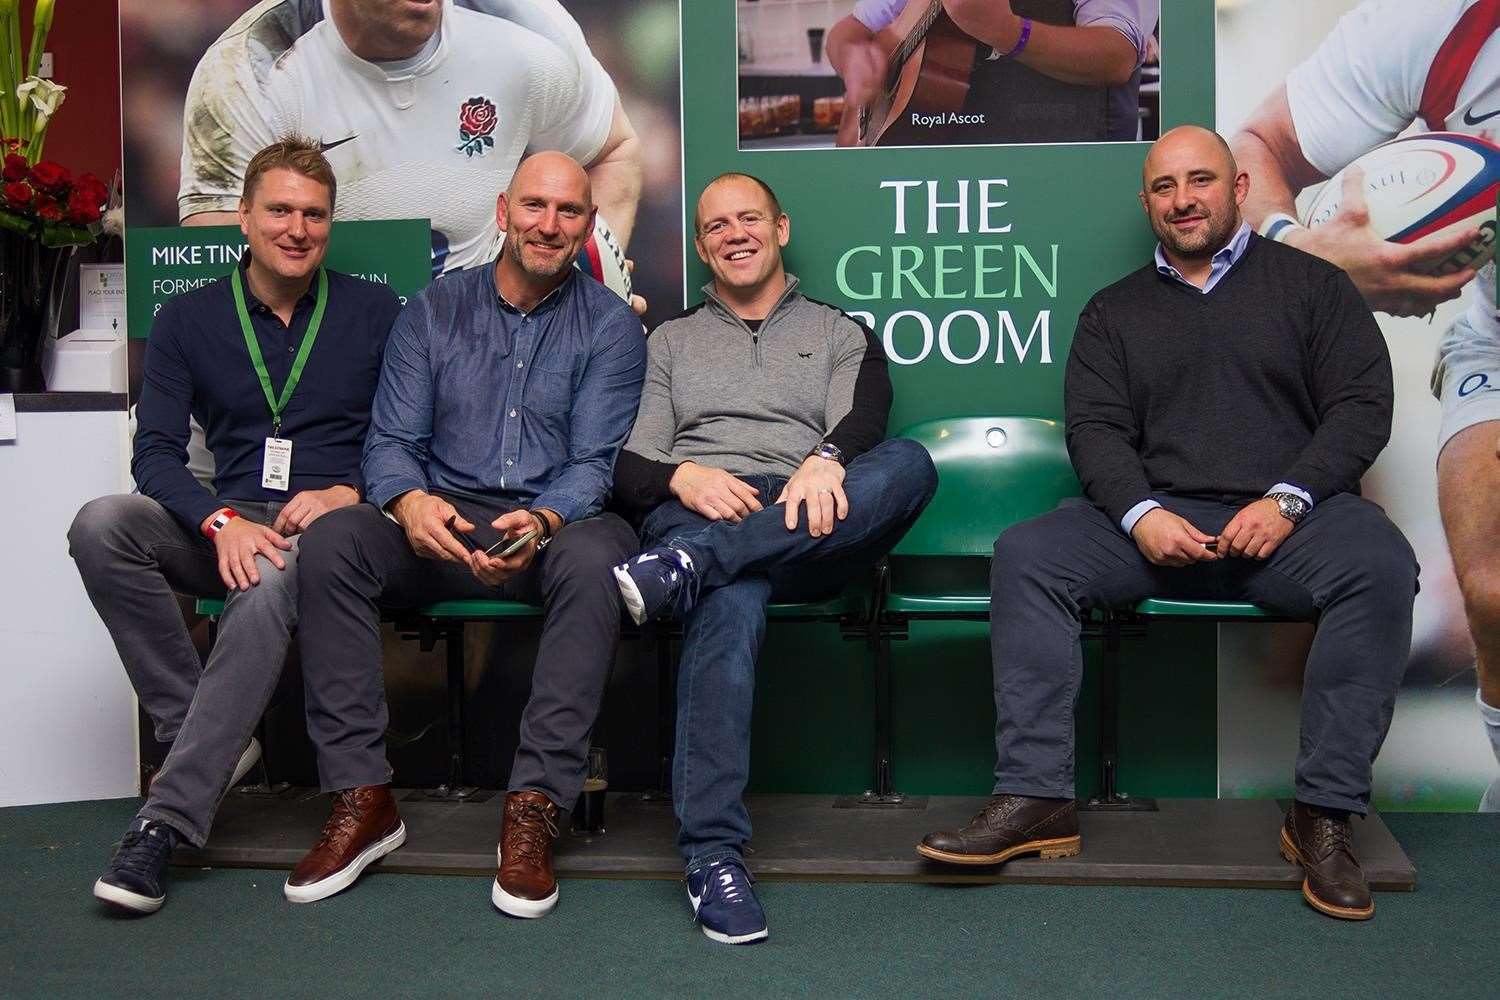 Hospitality Finder managing director Mike Dunderdale with Rugby World Cup winners Lawrence Dallaglio and Mike Tindall and ex-England player and former Maidstone Boys Grammar School pupil David Flatman - some of the big names the firm uses as part of its hospitality packages